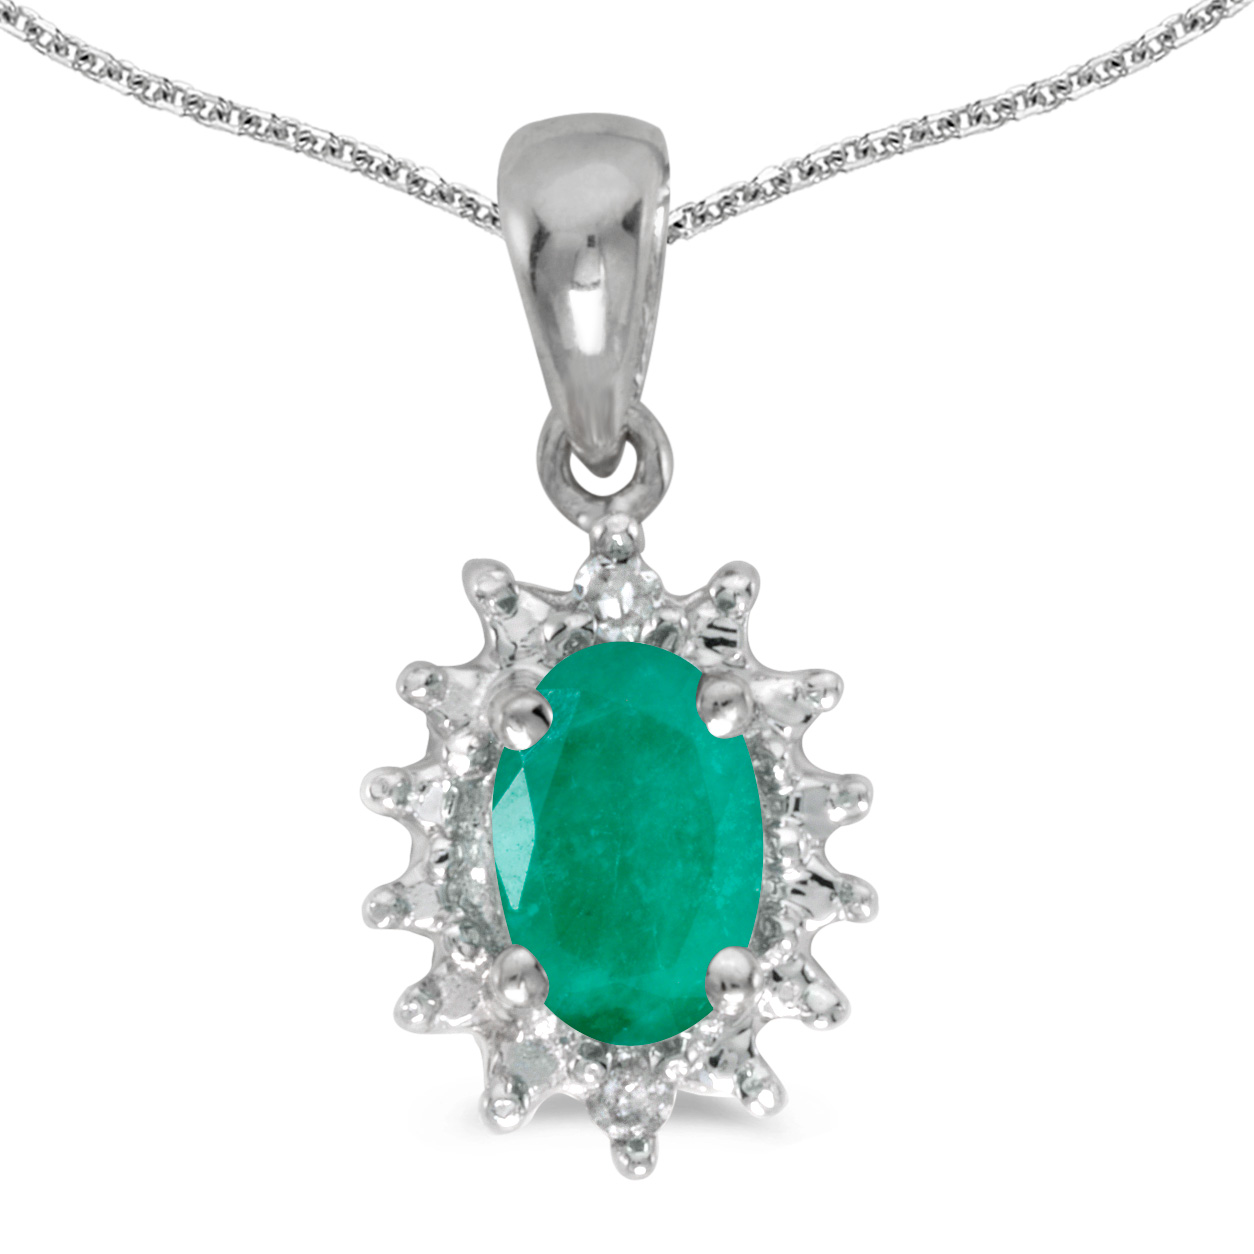 DIRECT-JEWELRY DON'T FORGET THE DASH 10k White Gold Oval Emerald And Diamond Pendant with 18" Chain